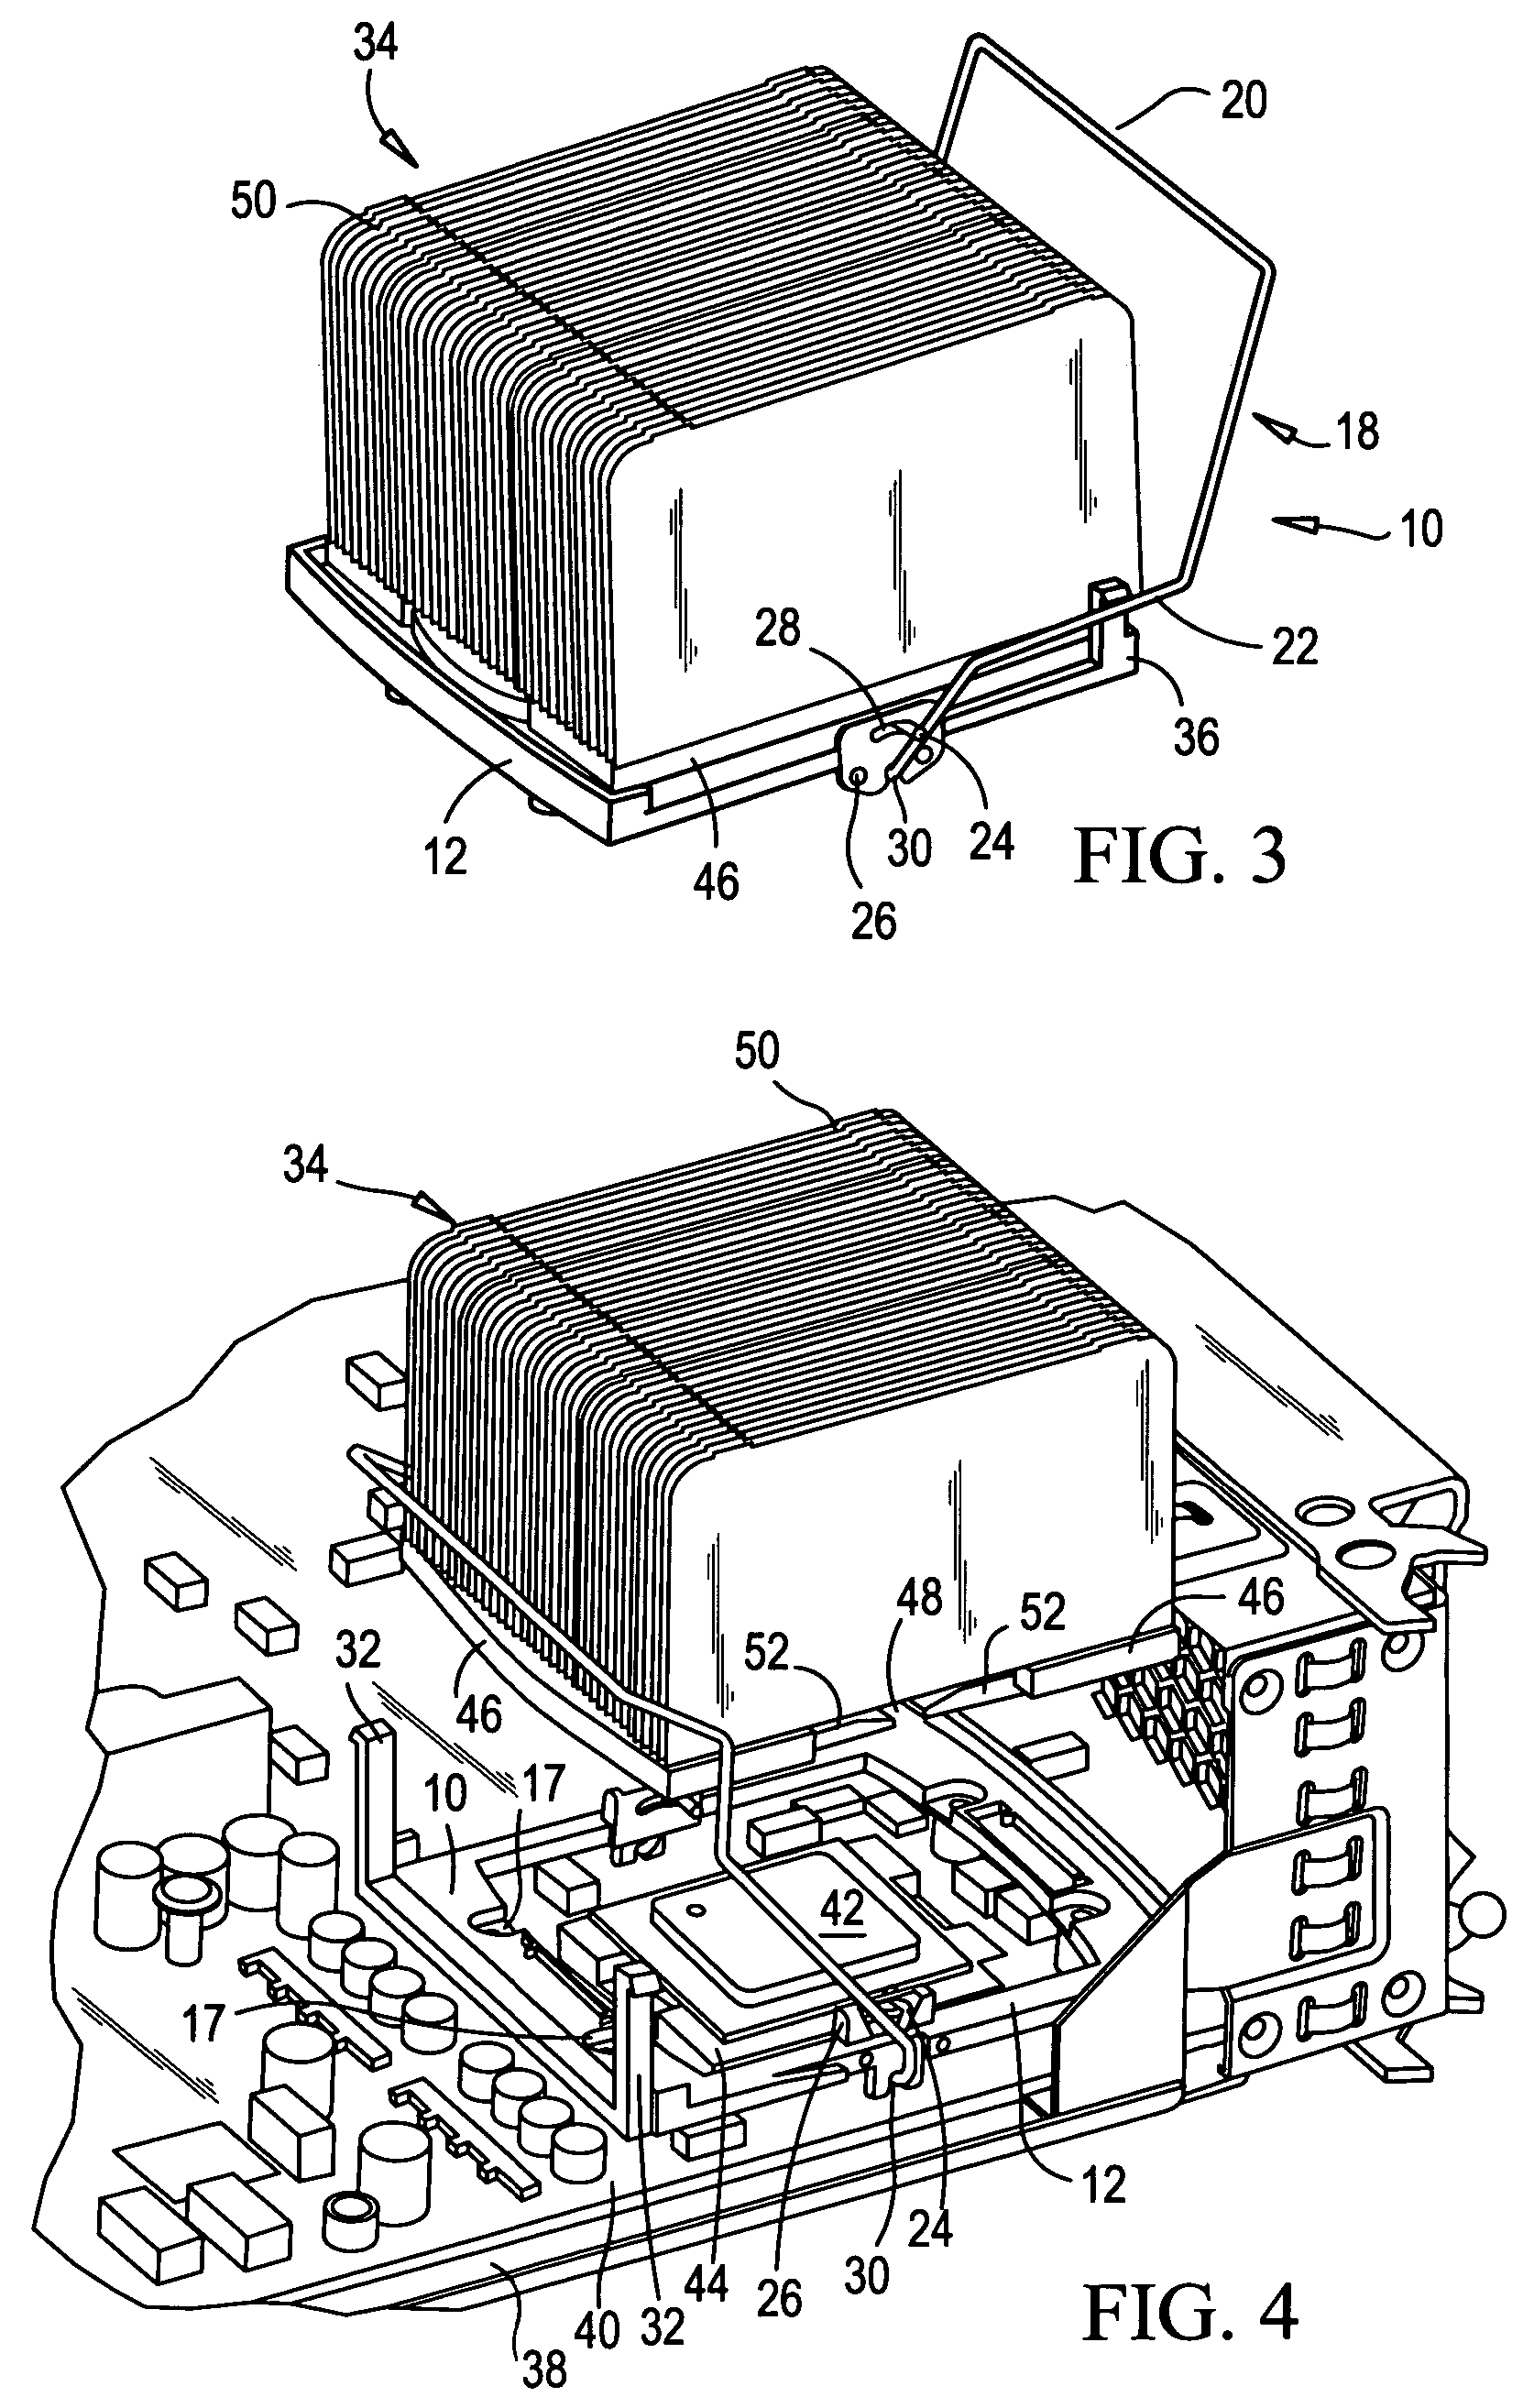 Torsion spring force and vertical shear pin retention of heat sink to CPU